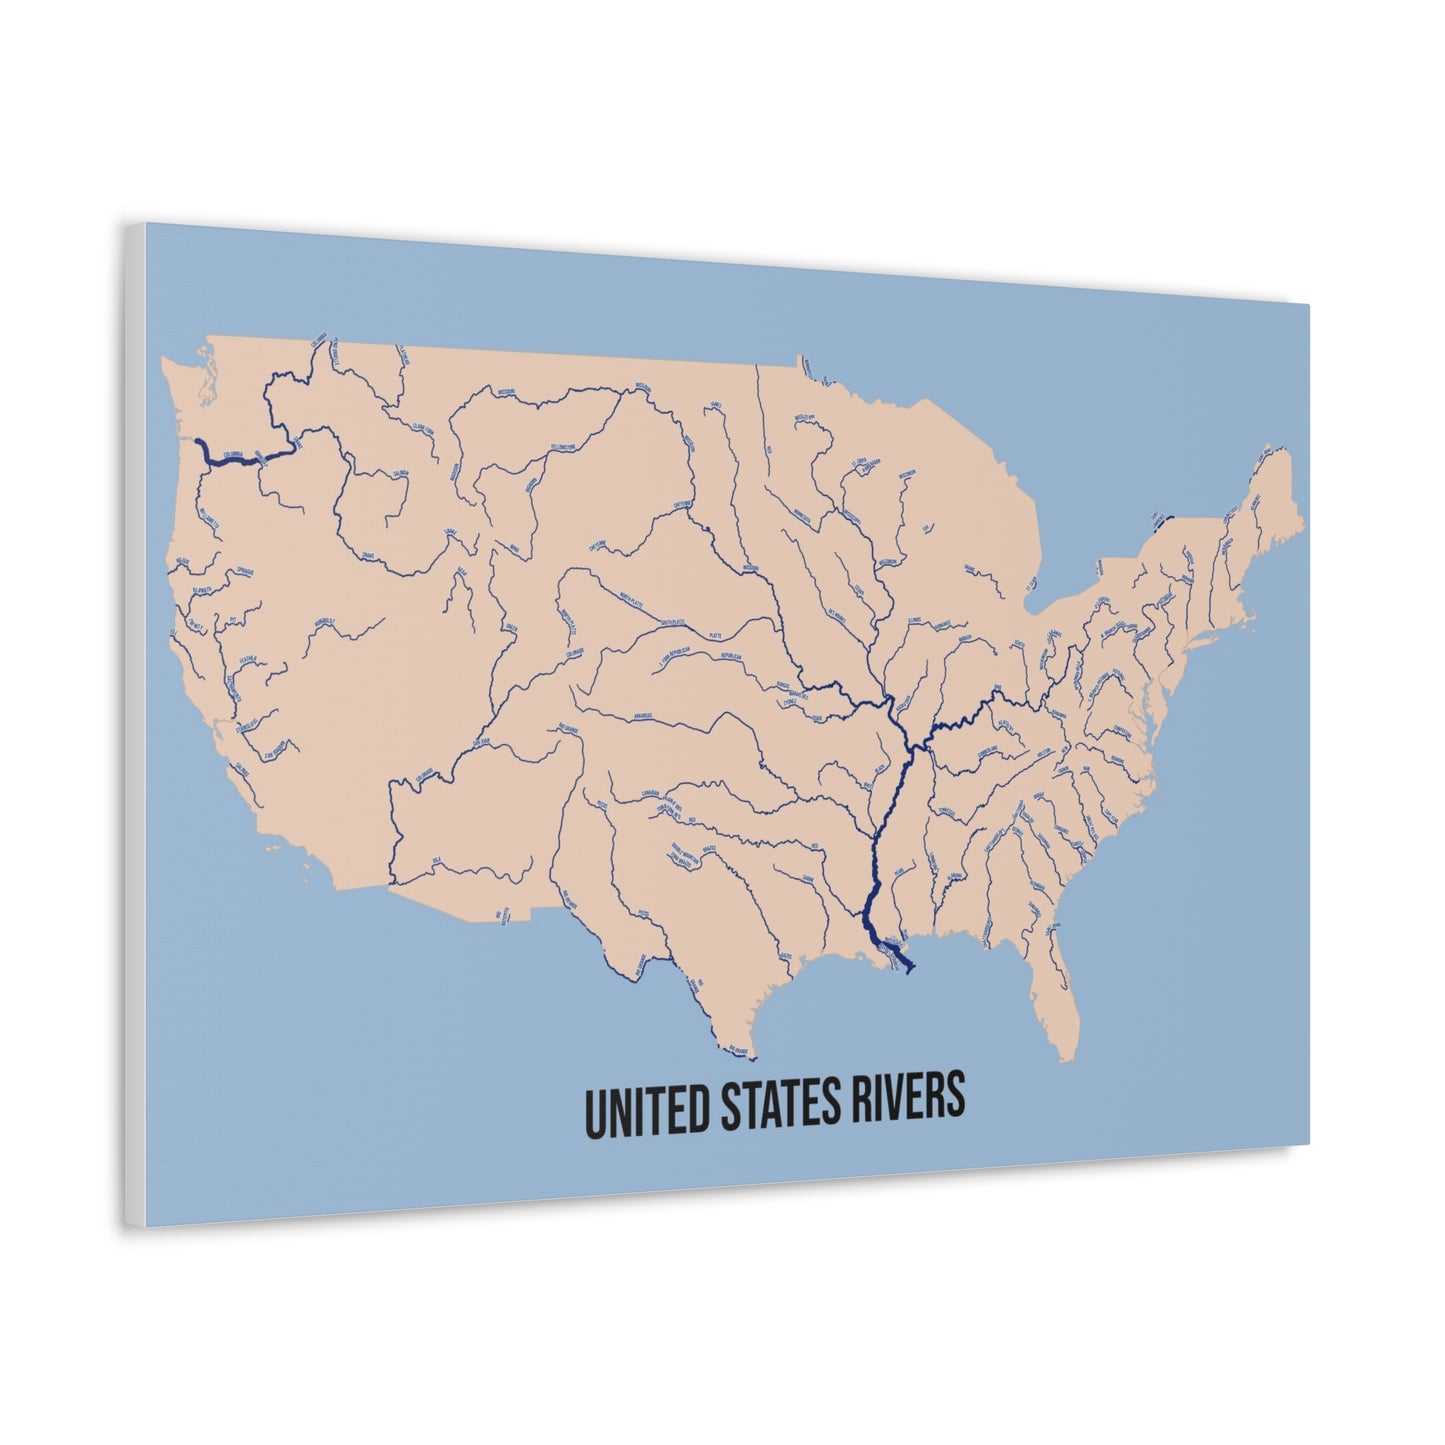 United States Rivers